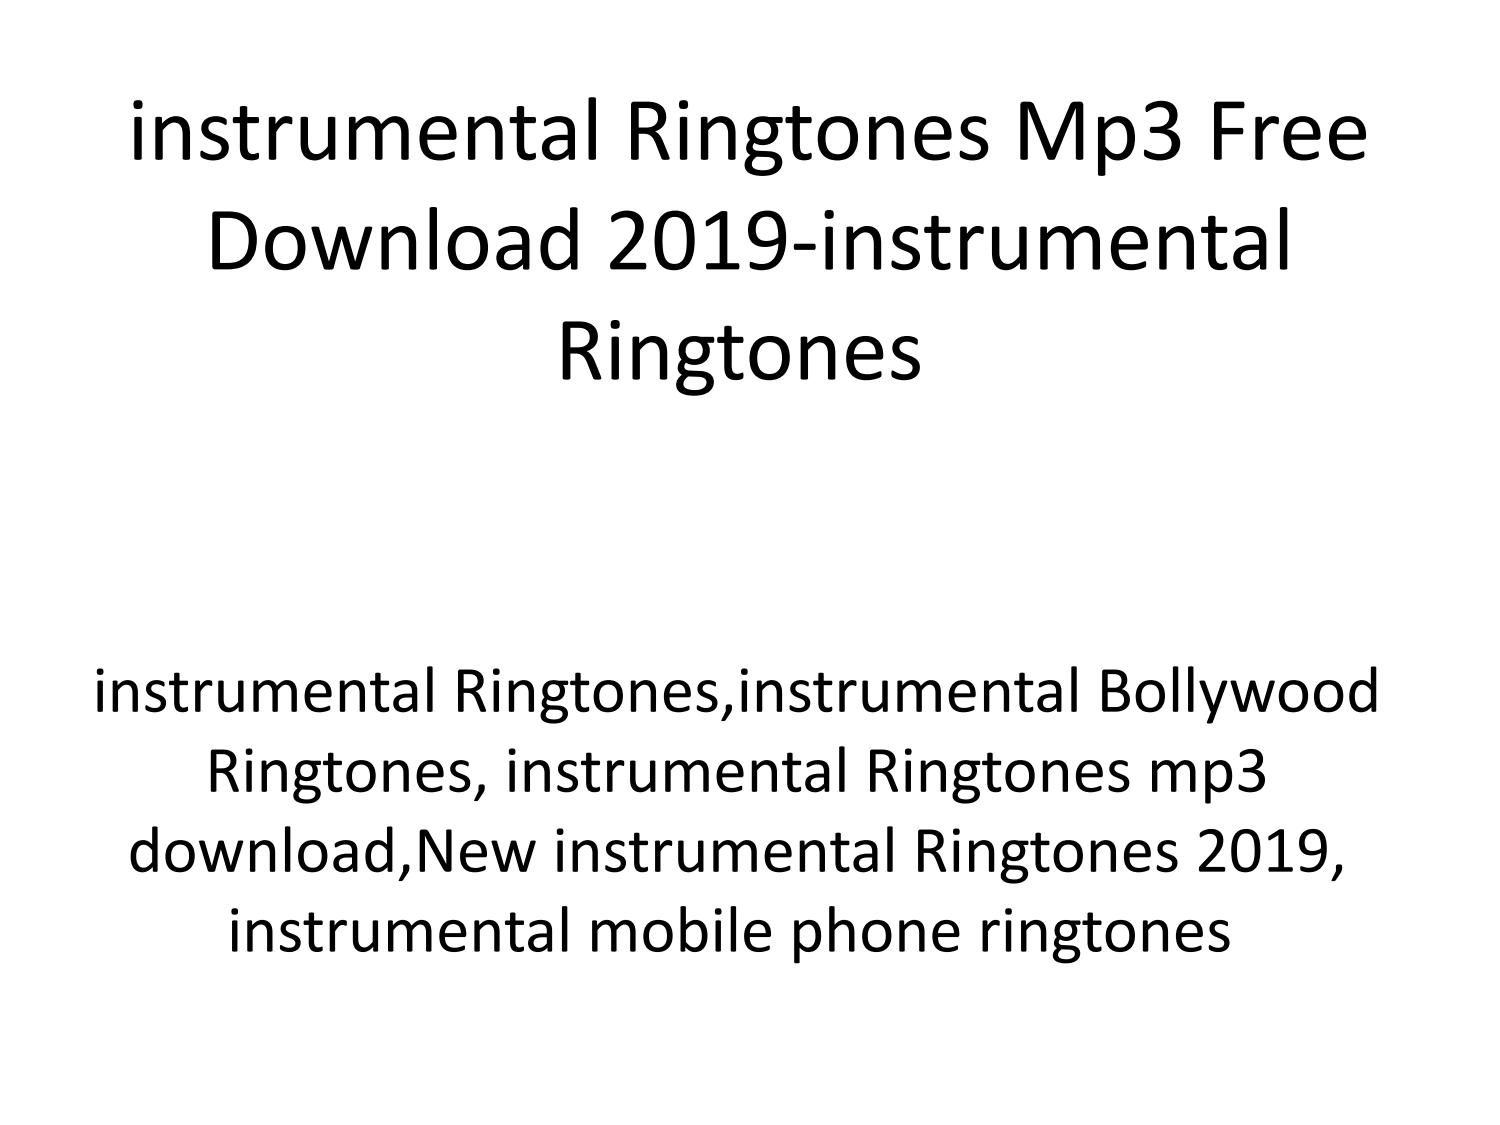 Bollywood ringtones mp3 download for mobiles